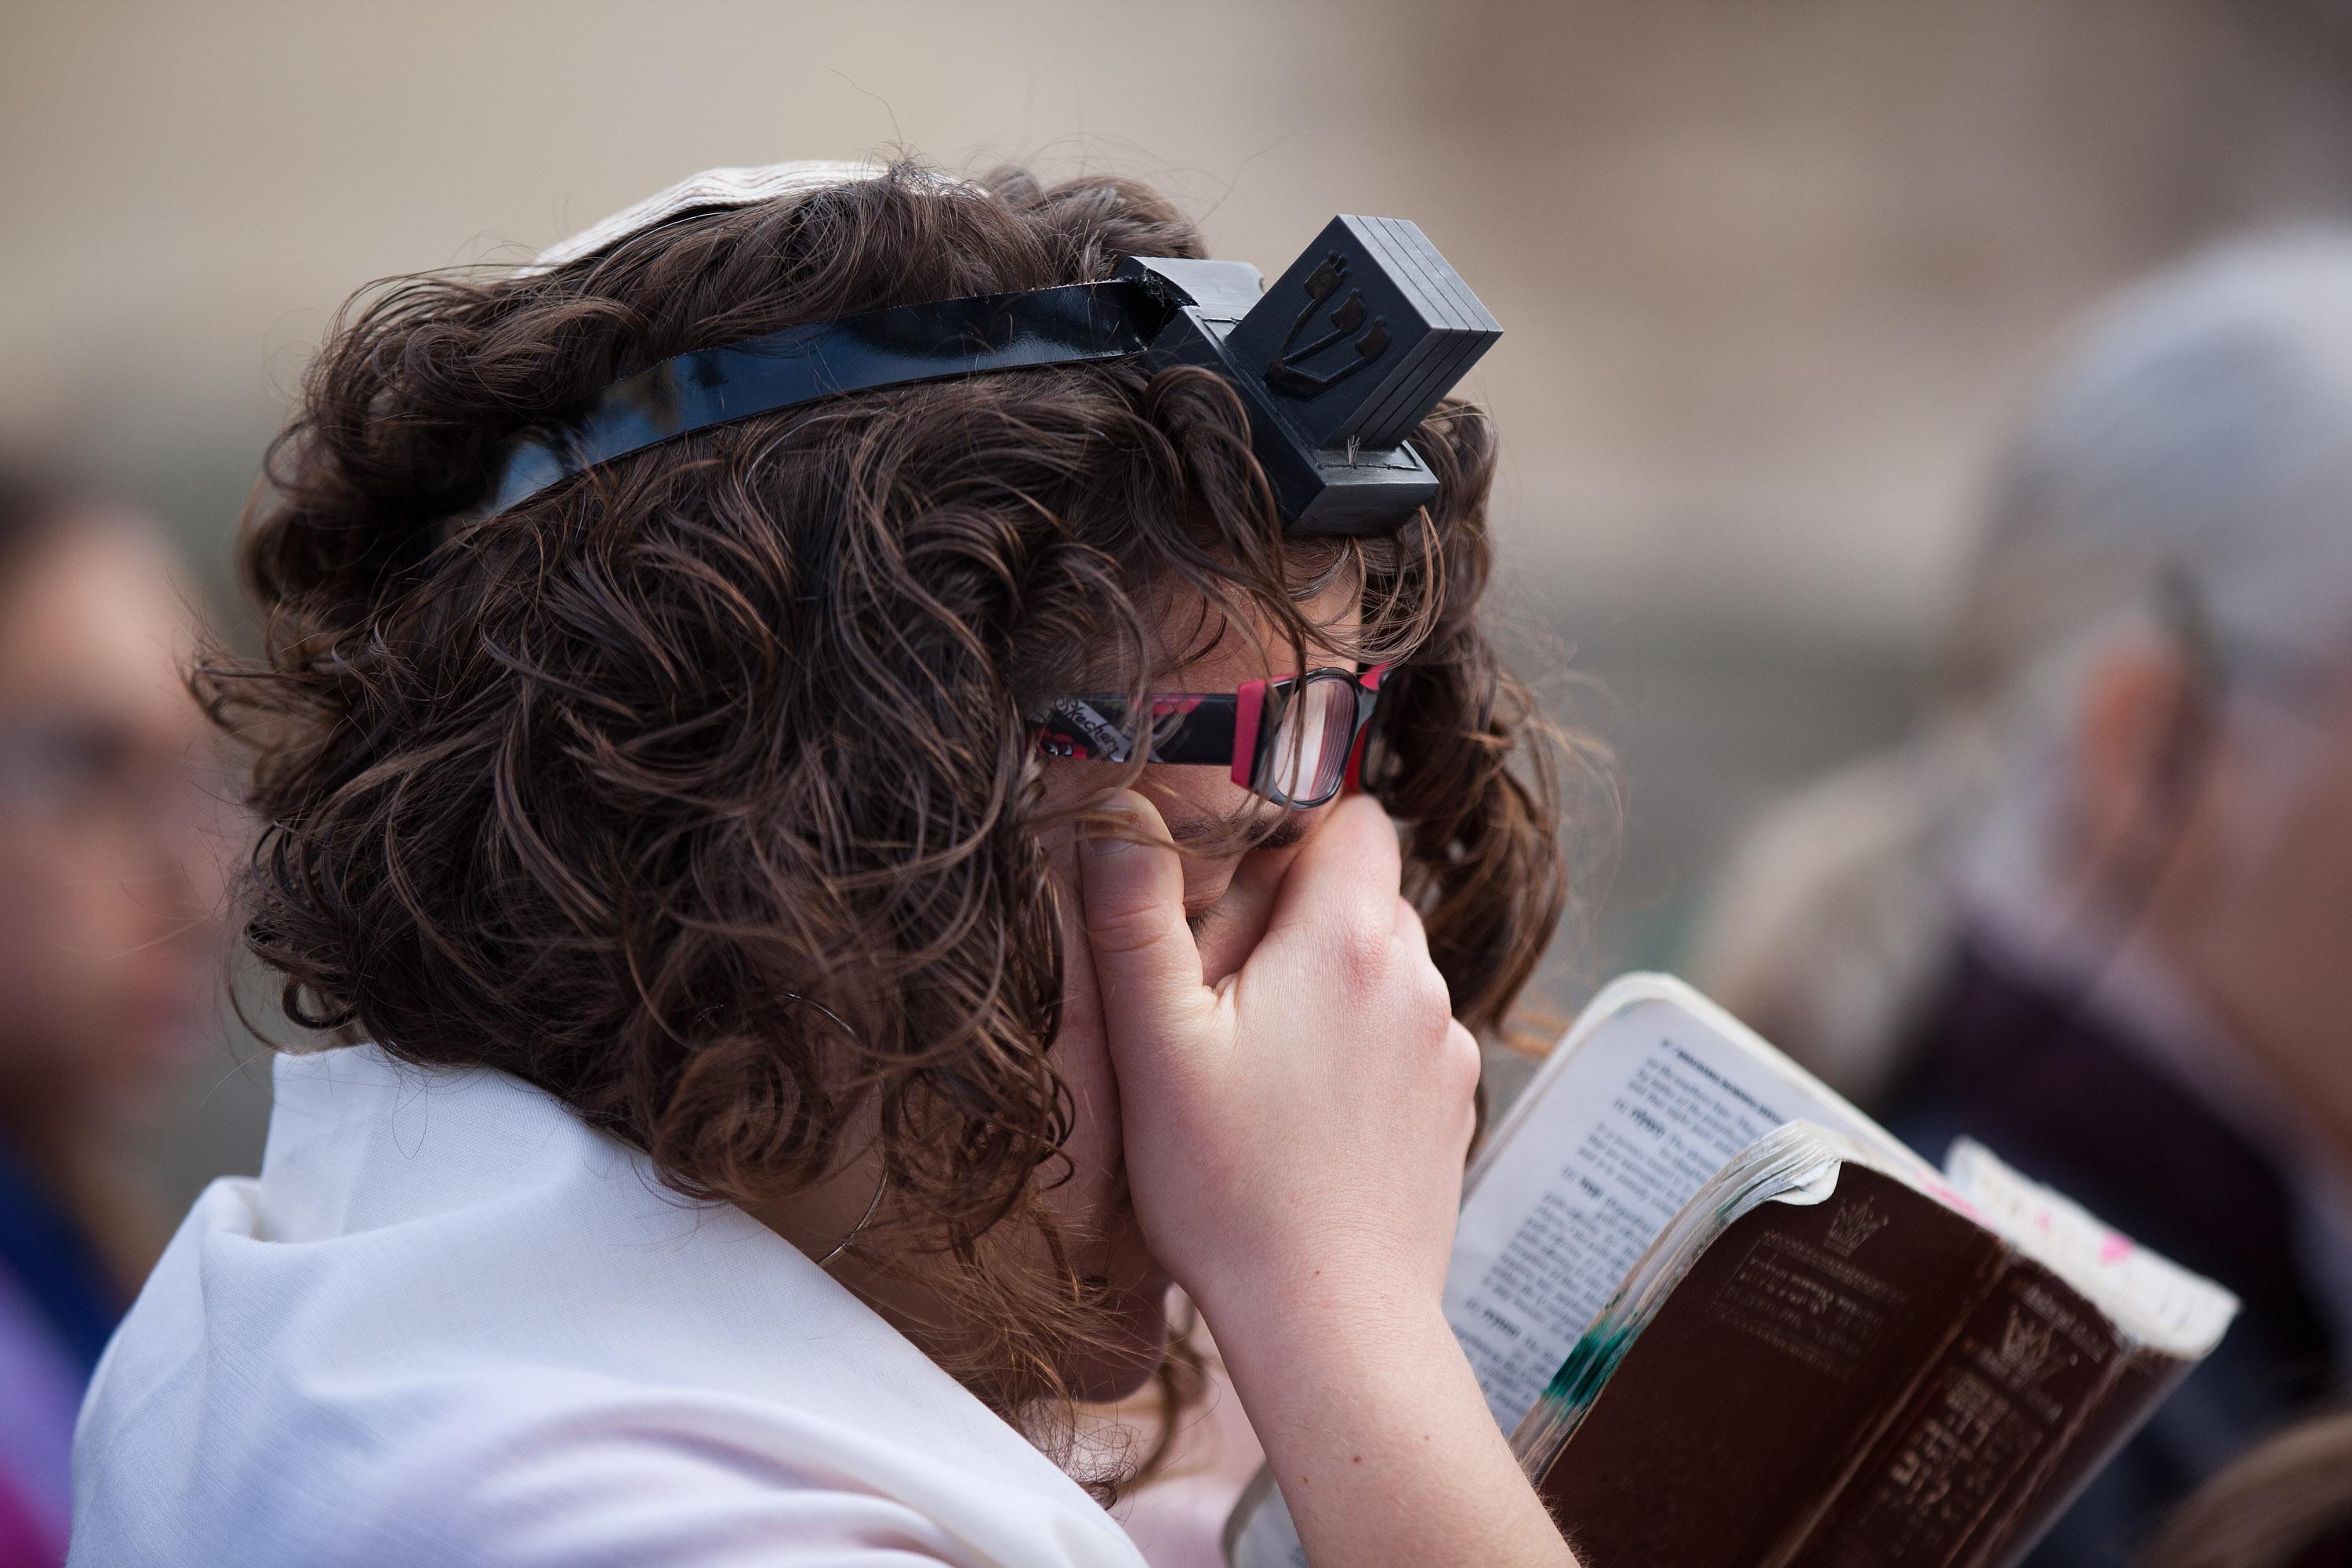 Learning to wear tefillin from women and transgender Jews